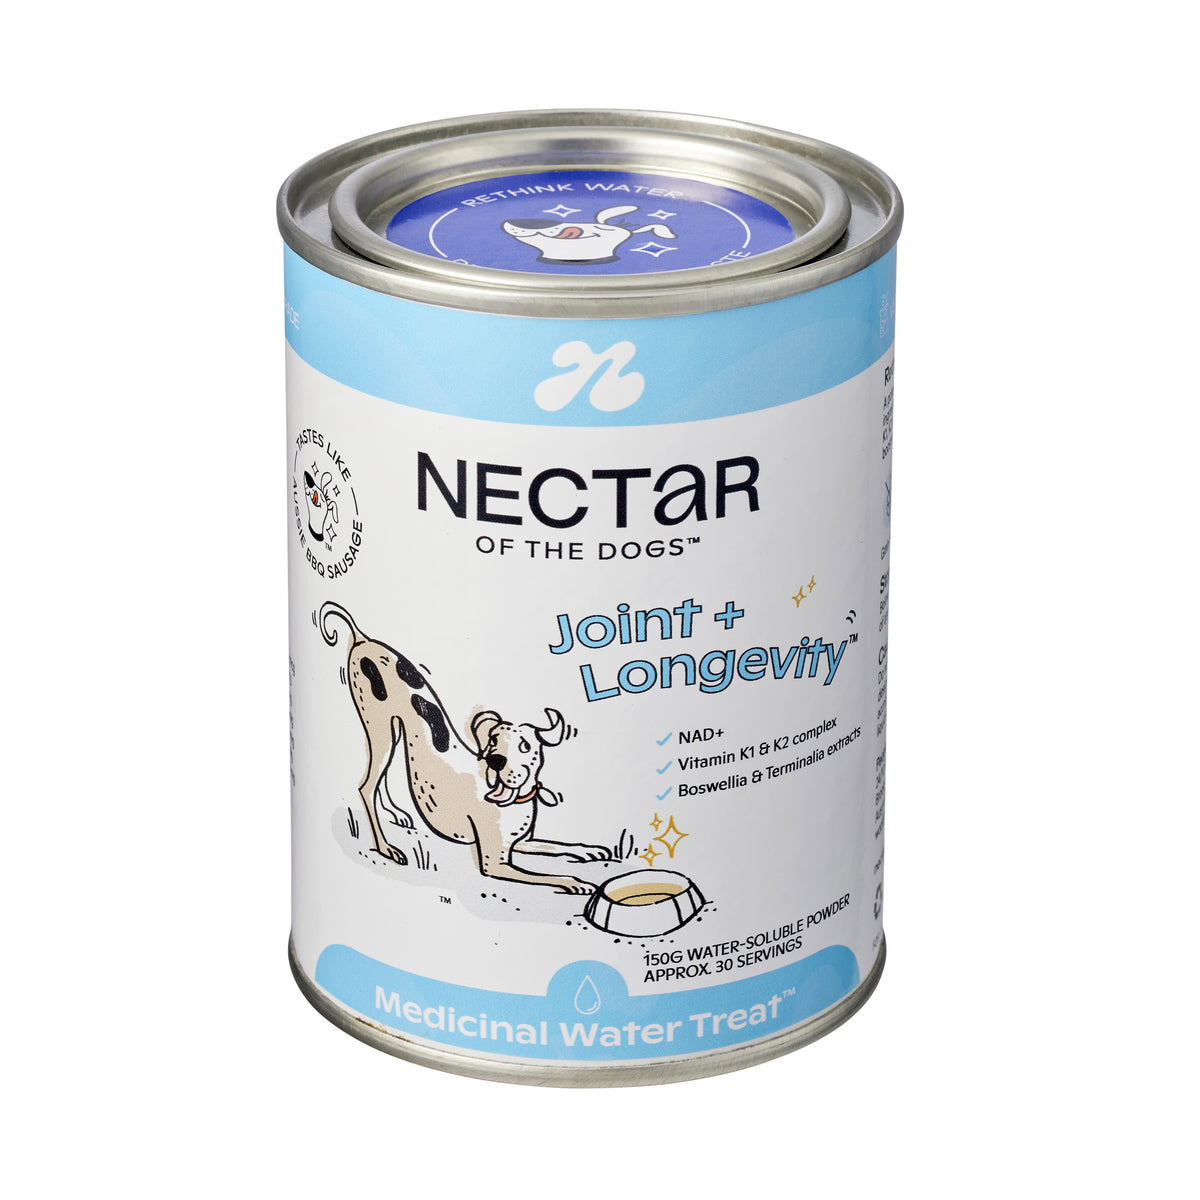 Nectar of the Dogs Joint + Longevity Powder 150g